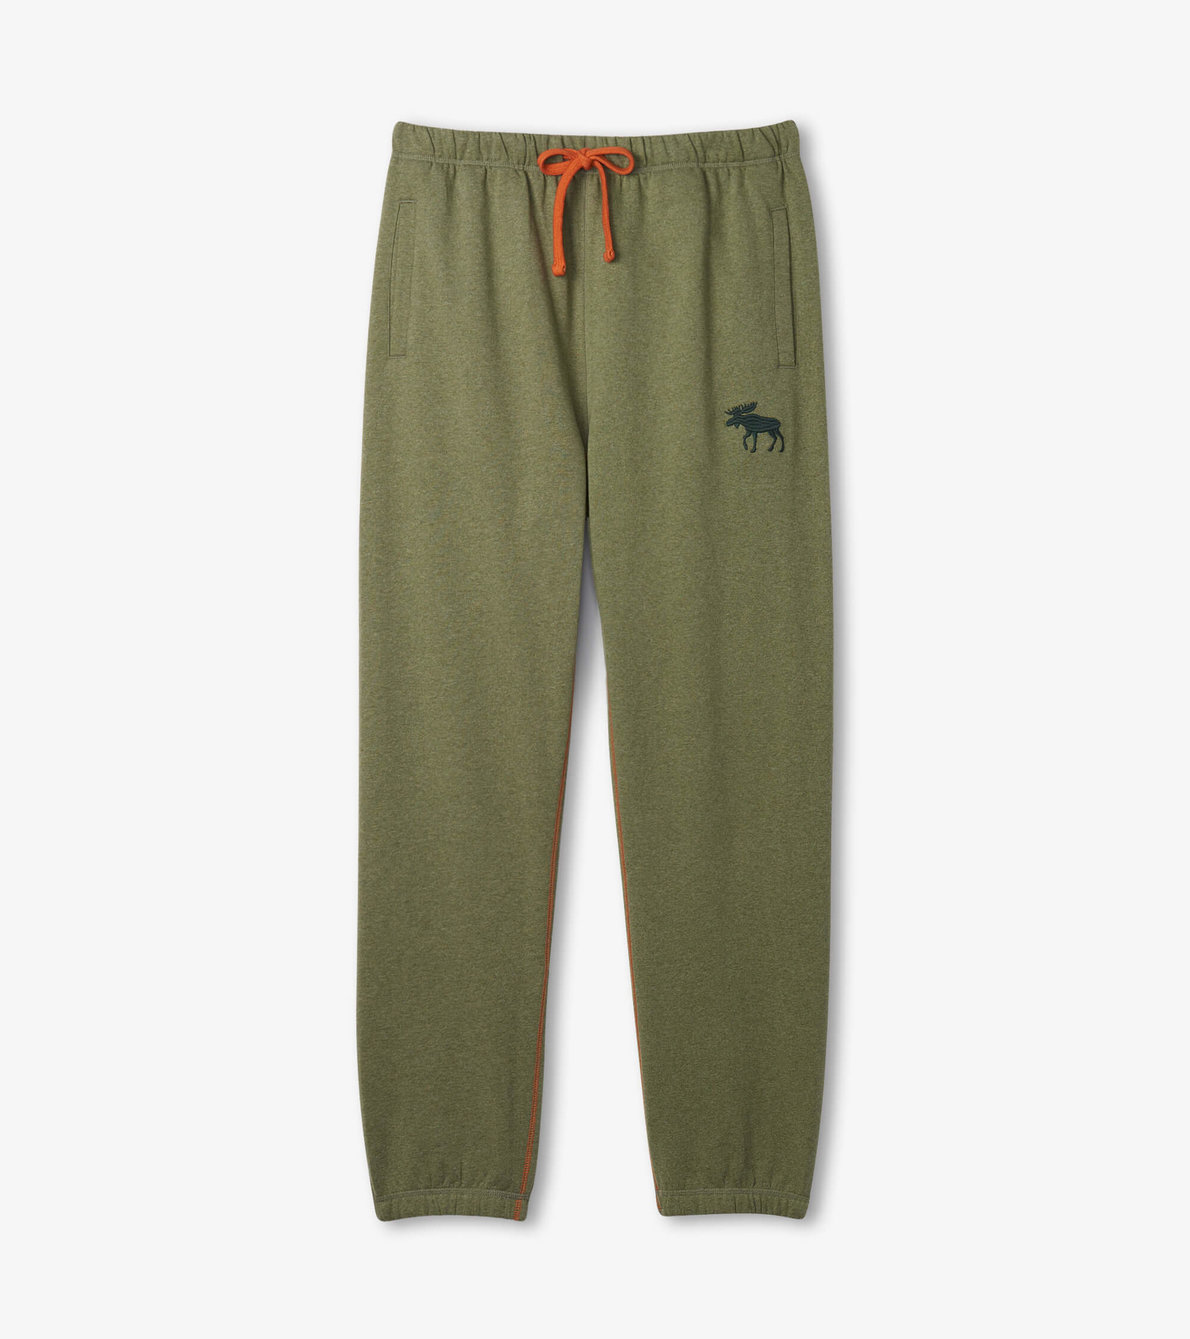 View larger image of Forest Green Moose Men's Heritage Joggers